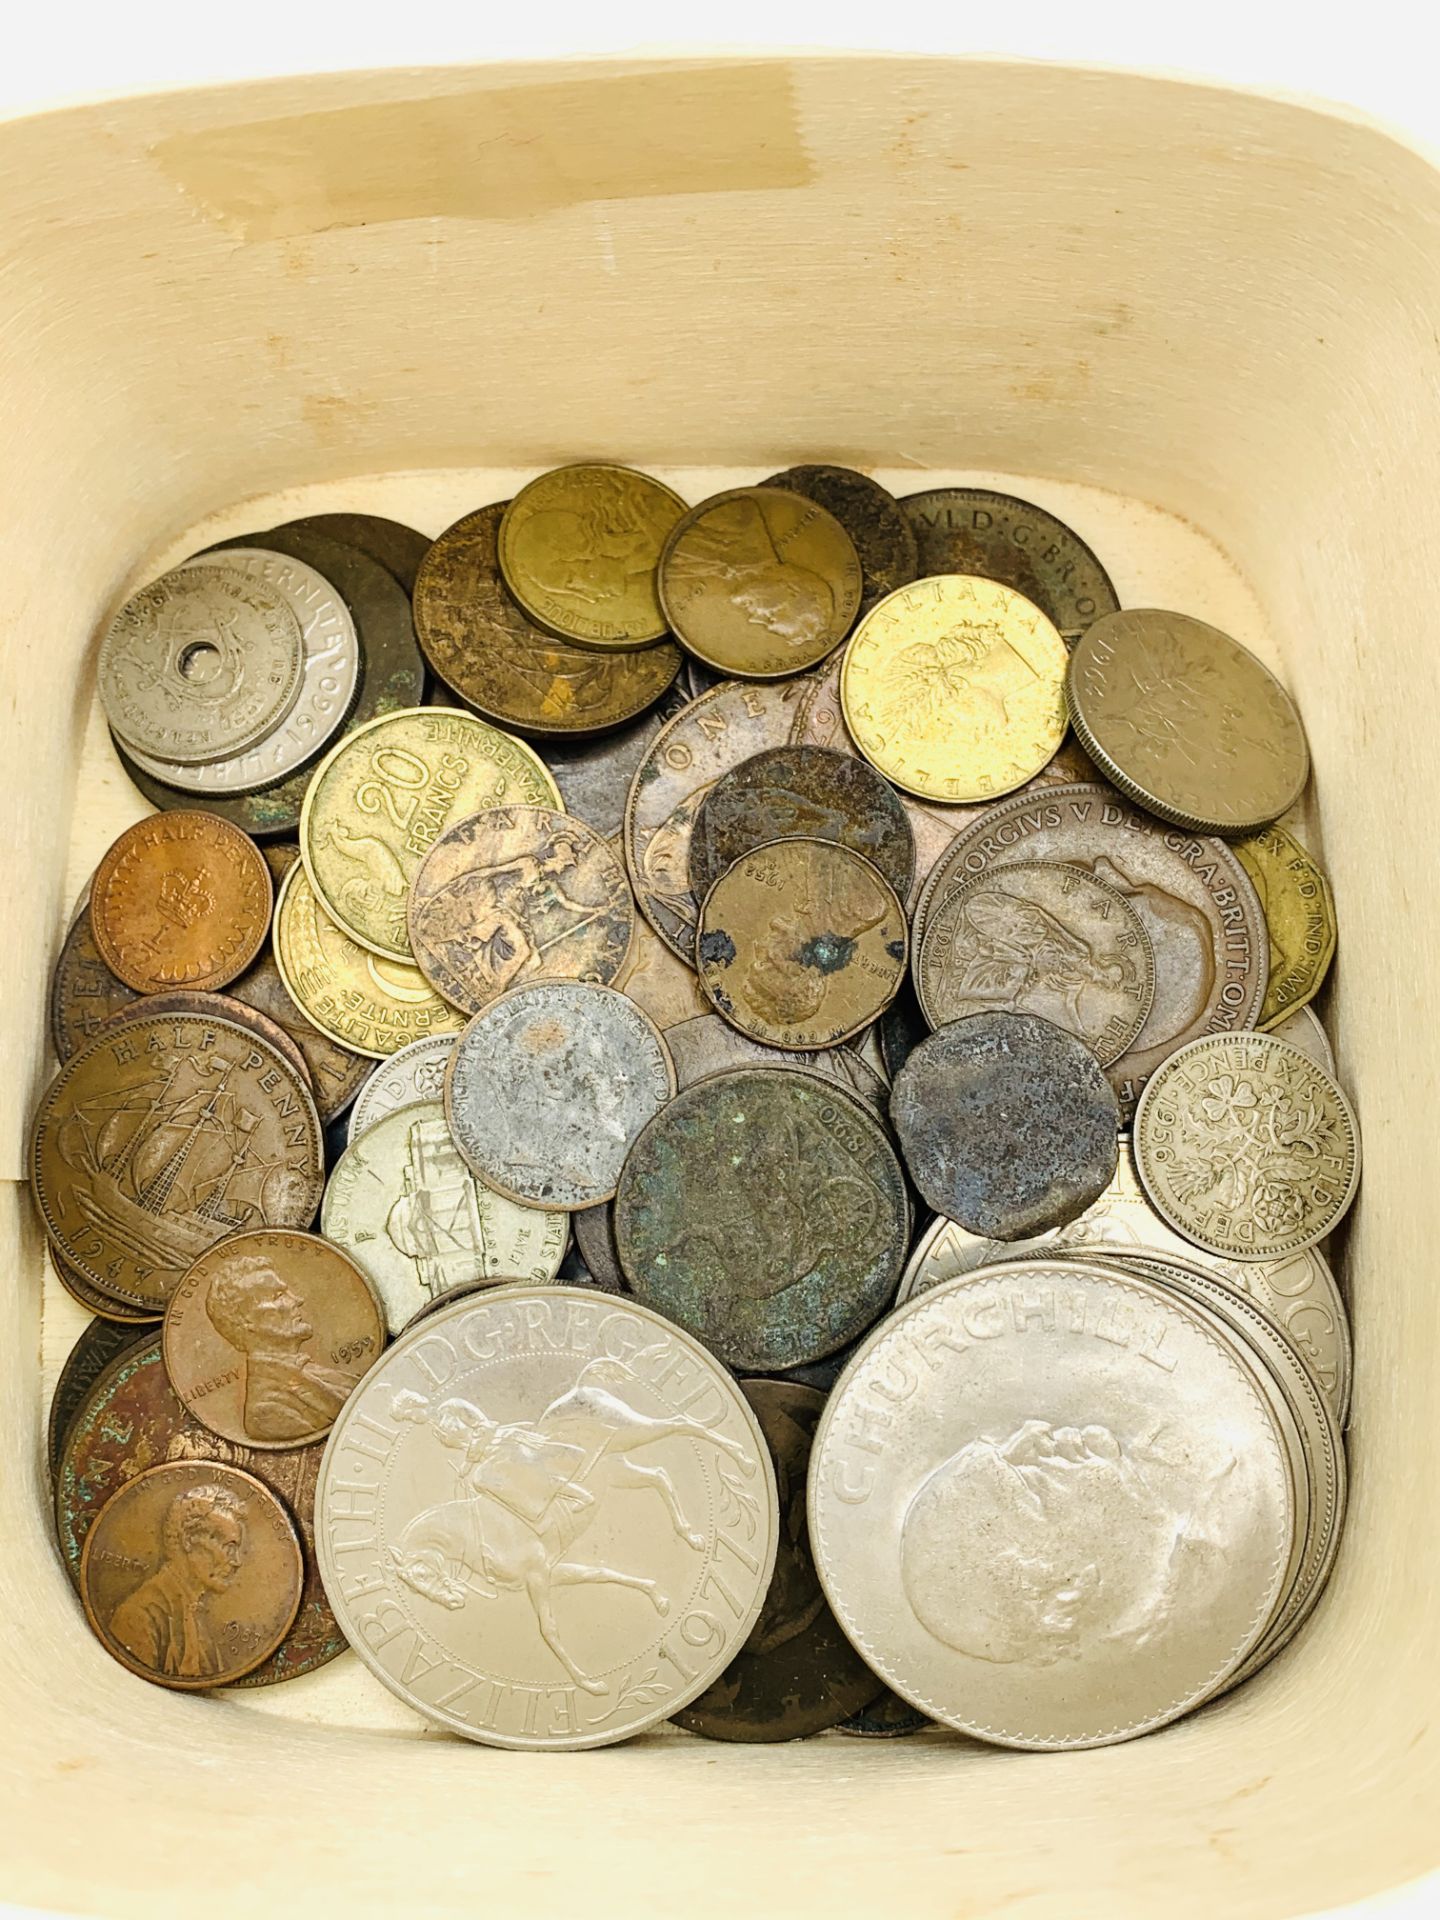 Quantity of mainly GB coins including 1898 crown and 2 x 1797 "cartwheel" 2 penny pieces - Image 3 of 4